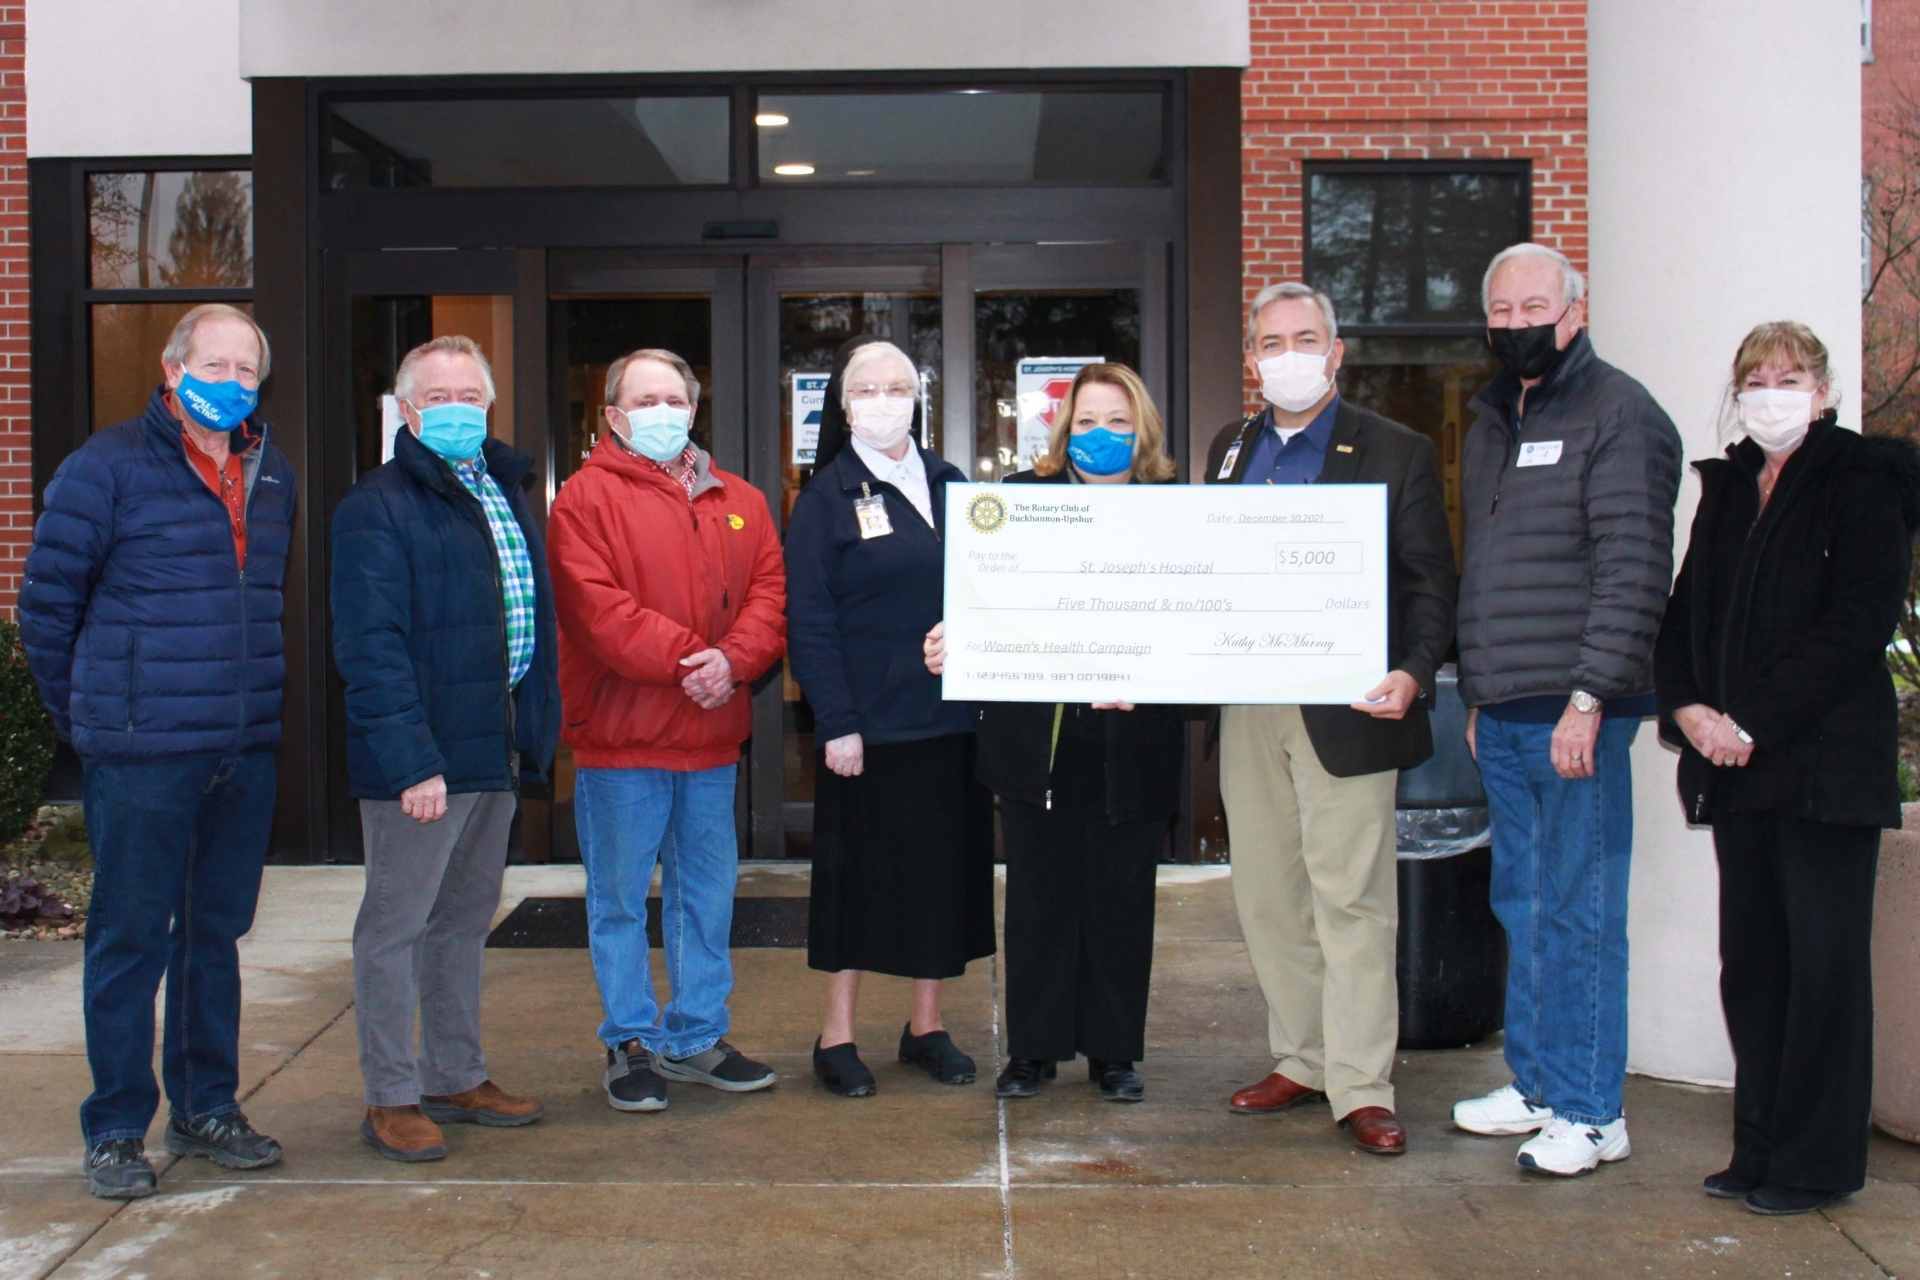 Pictured, from left to right: Steve Cain, Rotarian; Keith Buchanan, Rotarian; Steve Holmes, Foundation Board; Sister Francesca Lowis, Vice President of Mission Integration; Kathy McMurray, President of the Rotary Club of Buckhannon-Upshur; Skip Gjolberg, President of St. Joseph’s Hospital; Don Nestor Foundation Board and Rotarian; and Lisa Wharton, Vice President of Marketing & Foundation.